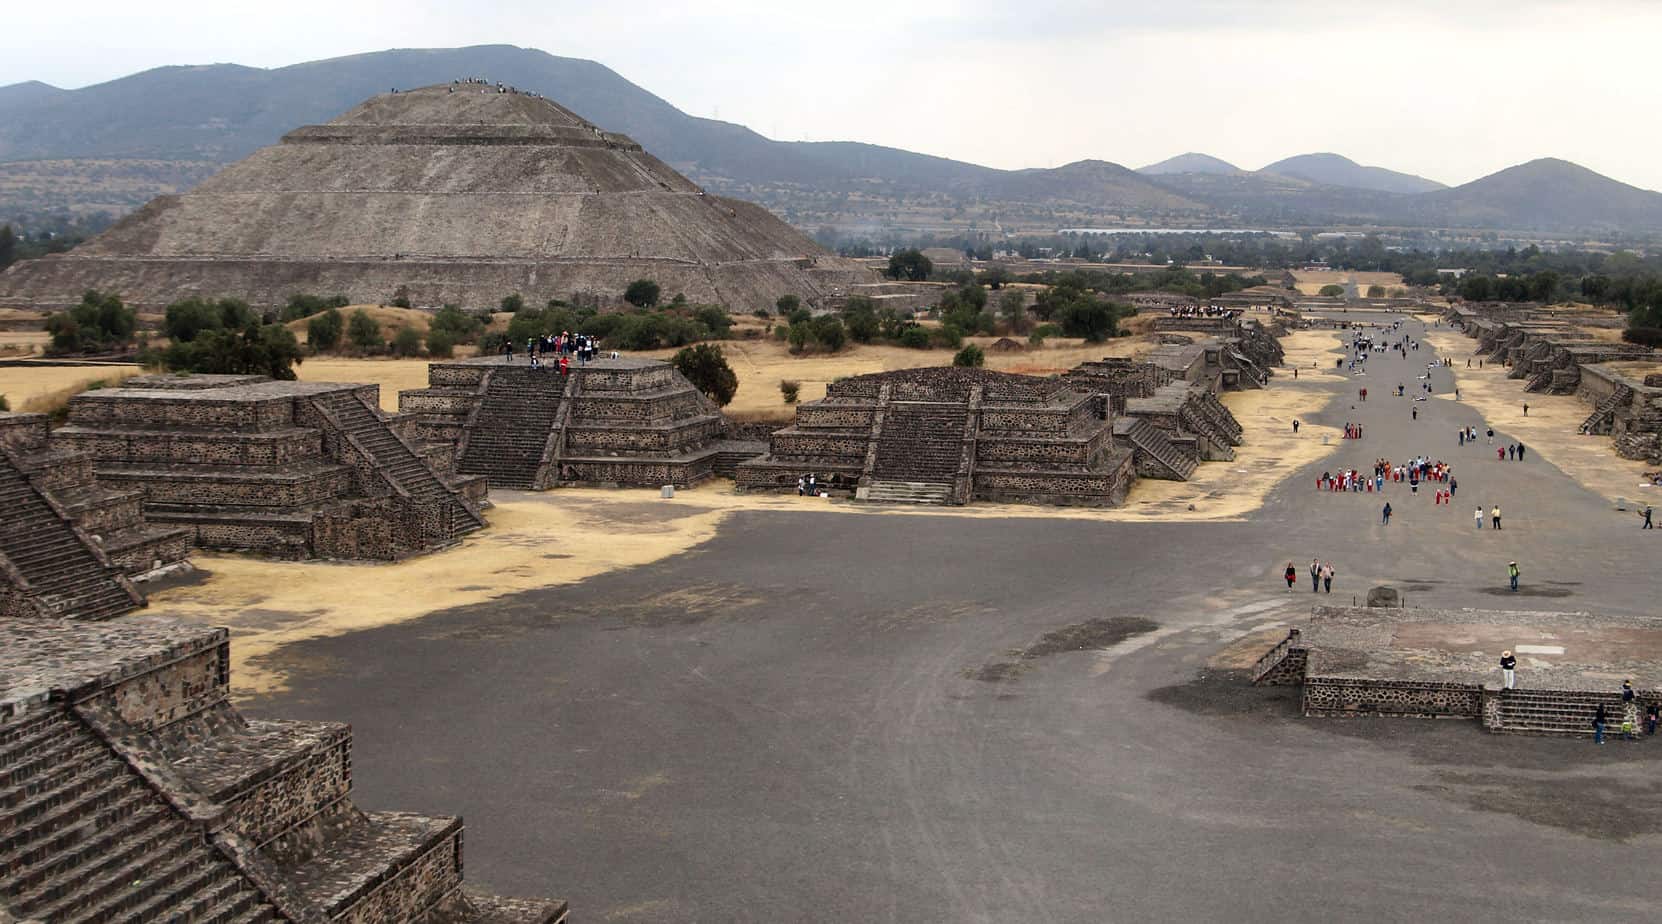 Pyramid and site of Teotihuacan